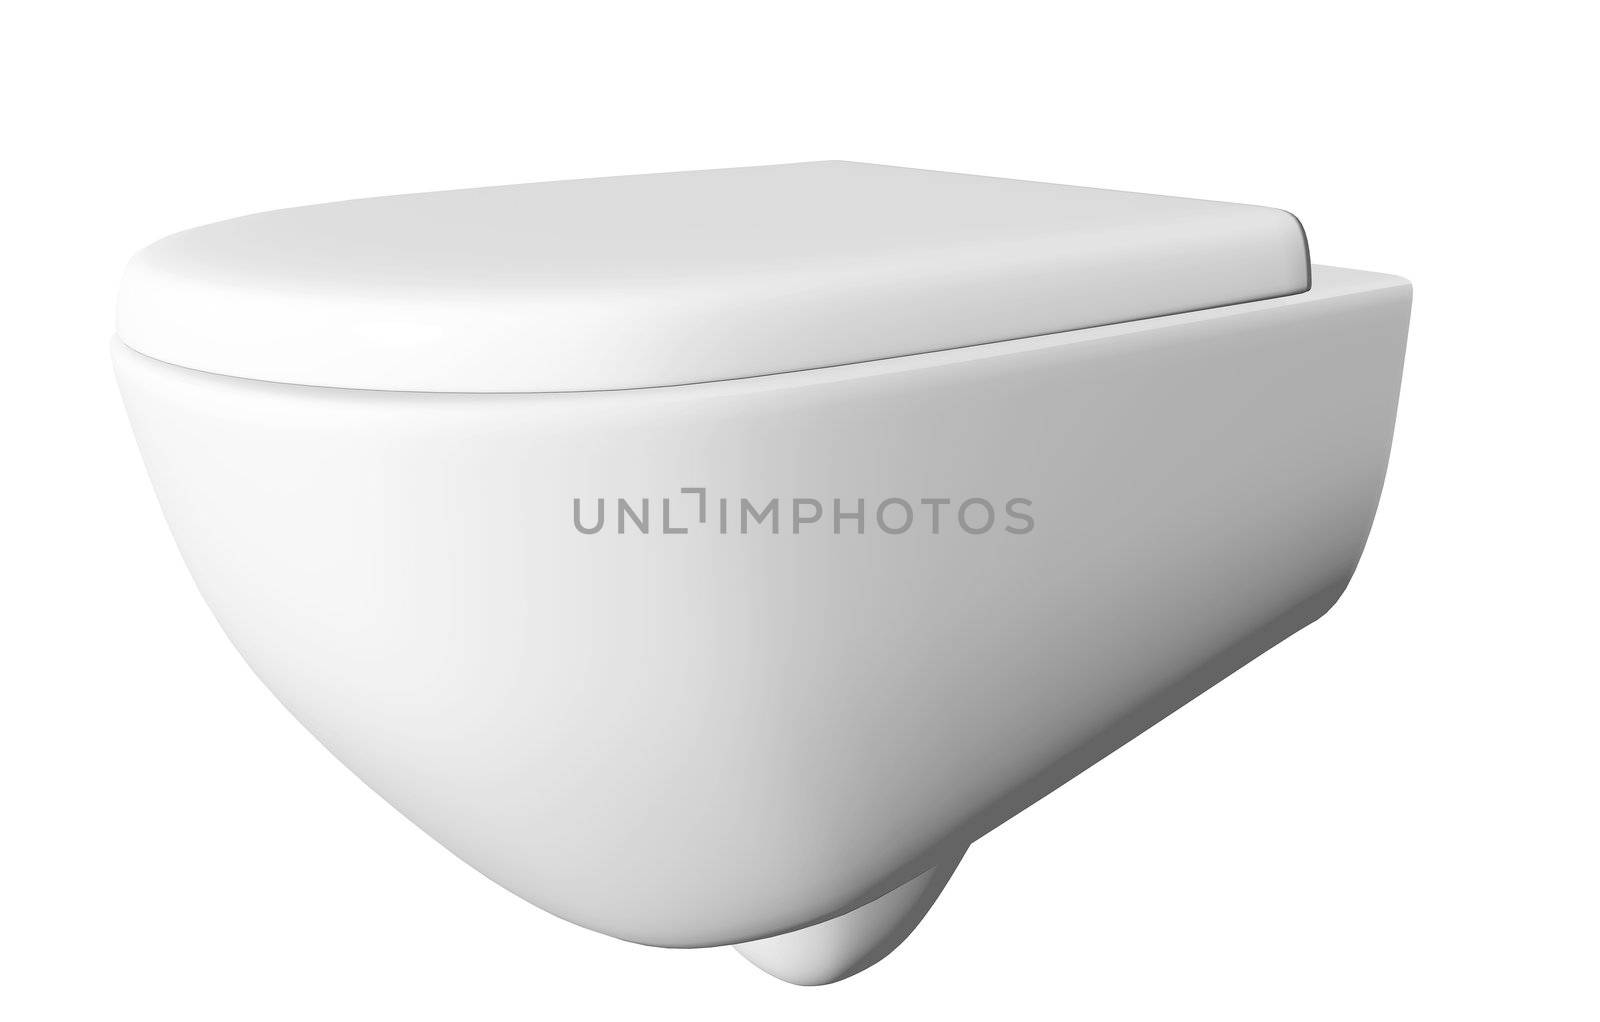 Modern white ceramic and acrylic toilet by Morphart